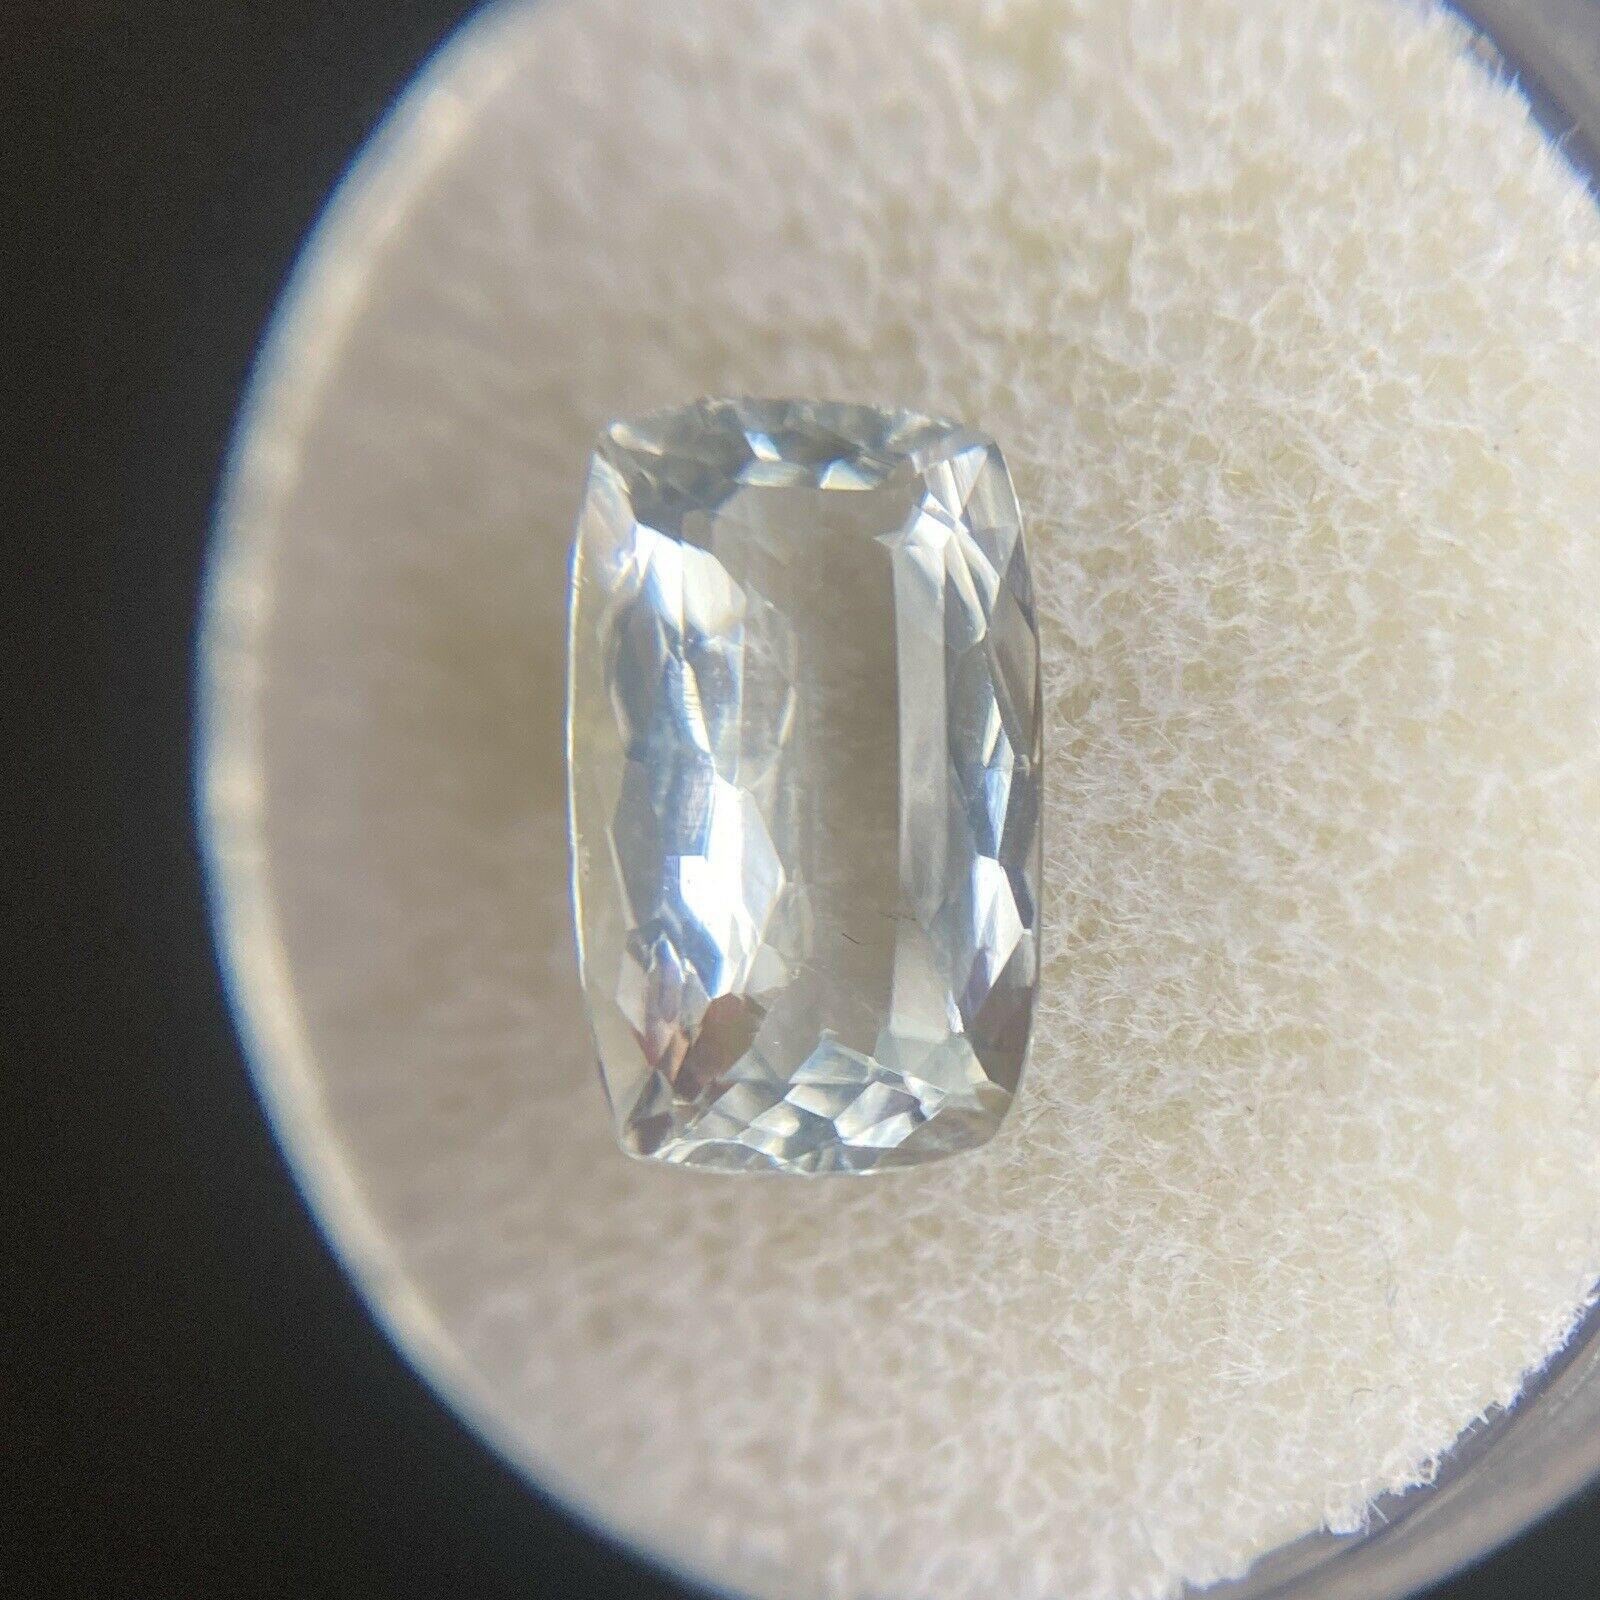 Natural Light Blue Aquamarine 2.55ct Antique Cushion Cut Loose Gem 11.9 x 7.2mm

Natural Light Blue Aquamarine Gemstone. 
2.55 Carat with a beautiful light blue colour and excellent clarity. A very clean gem. 
Also has an excellent antique-cushion